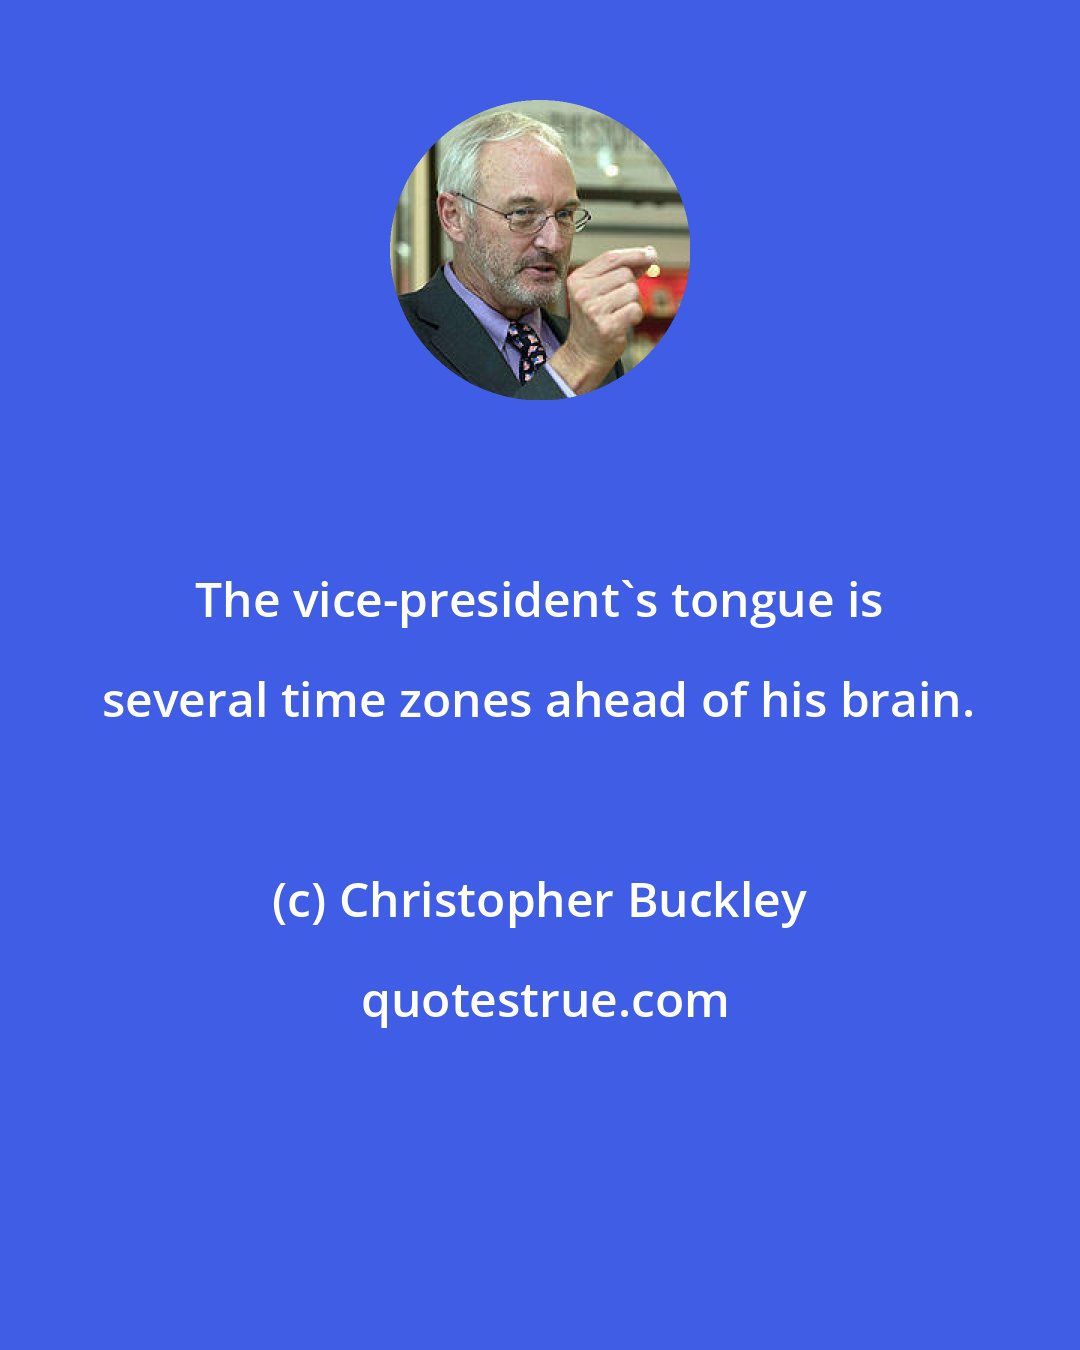 Christopher Buckley: The vice-president's tongue is several time zones ahead of his brain.